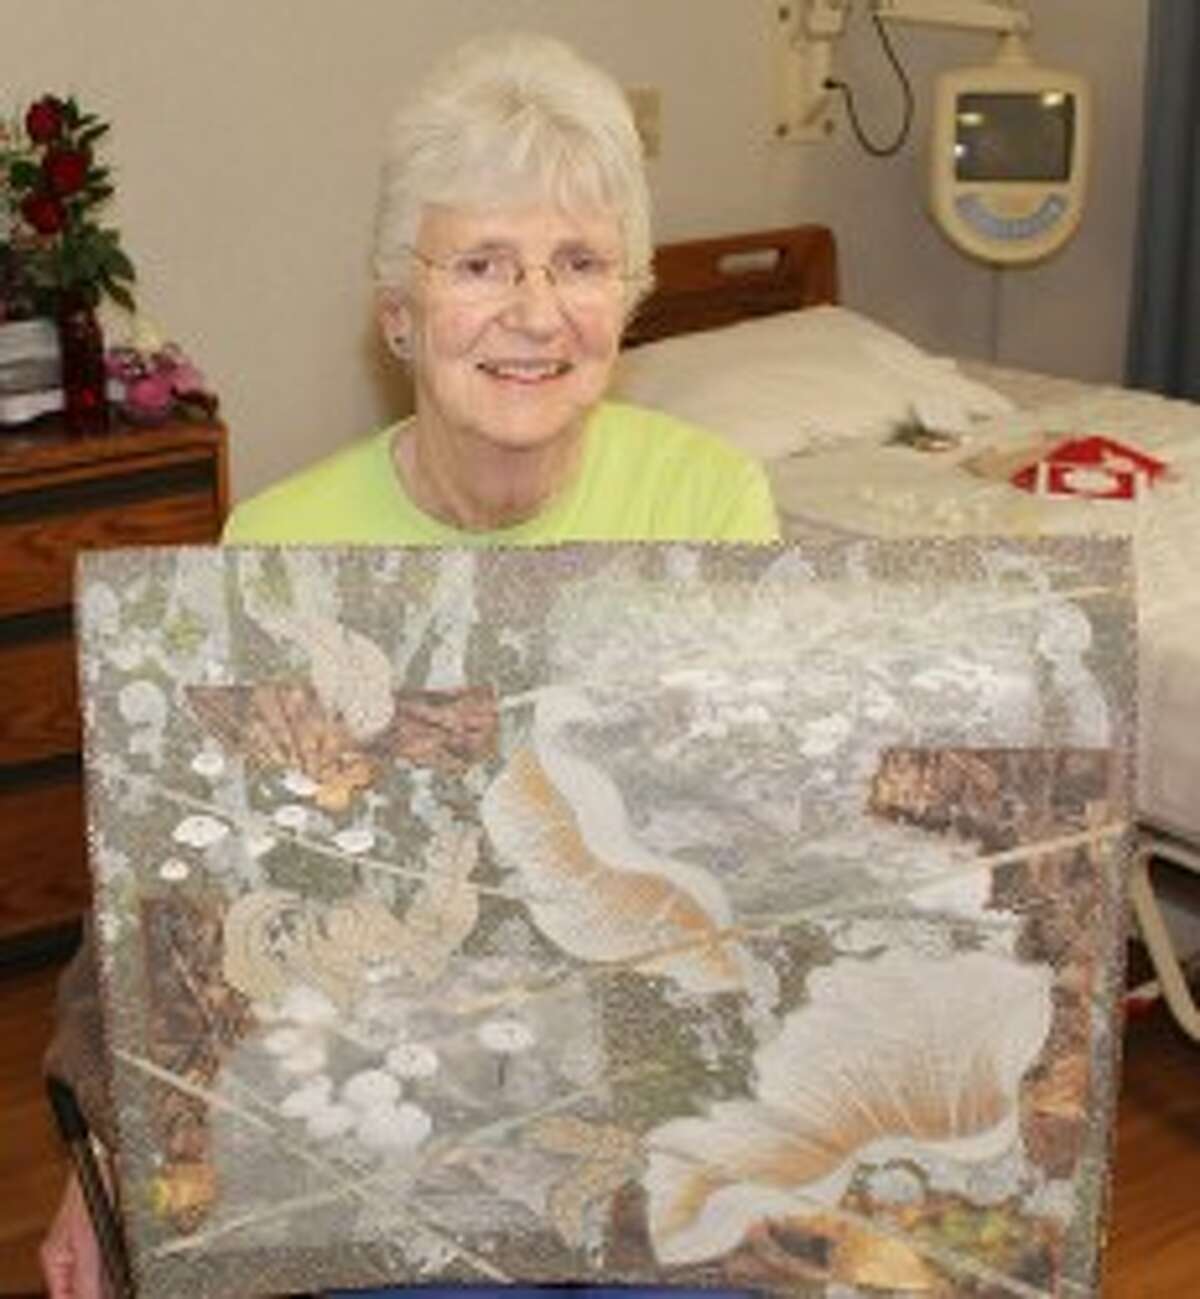 CREATING ART: After Kelly’s stroke, she was worried she would not be able to create wall hangings. On her last day of rehab at Mecosta County Medical Center, she was able to sew again.